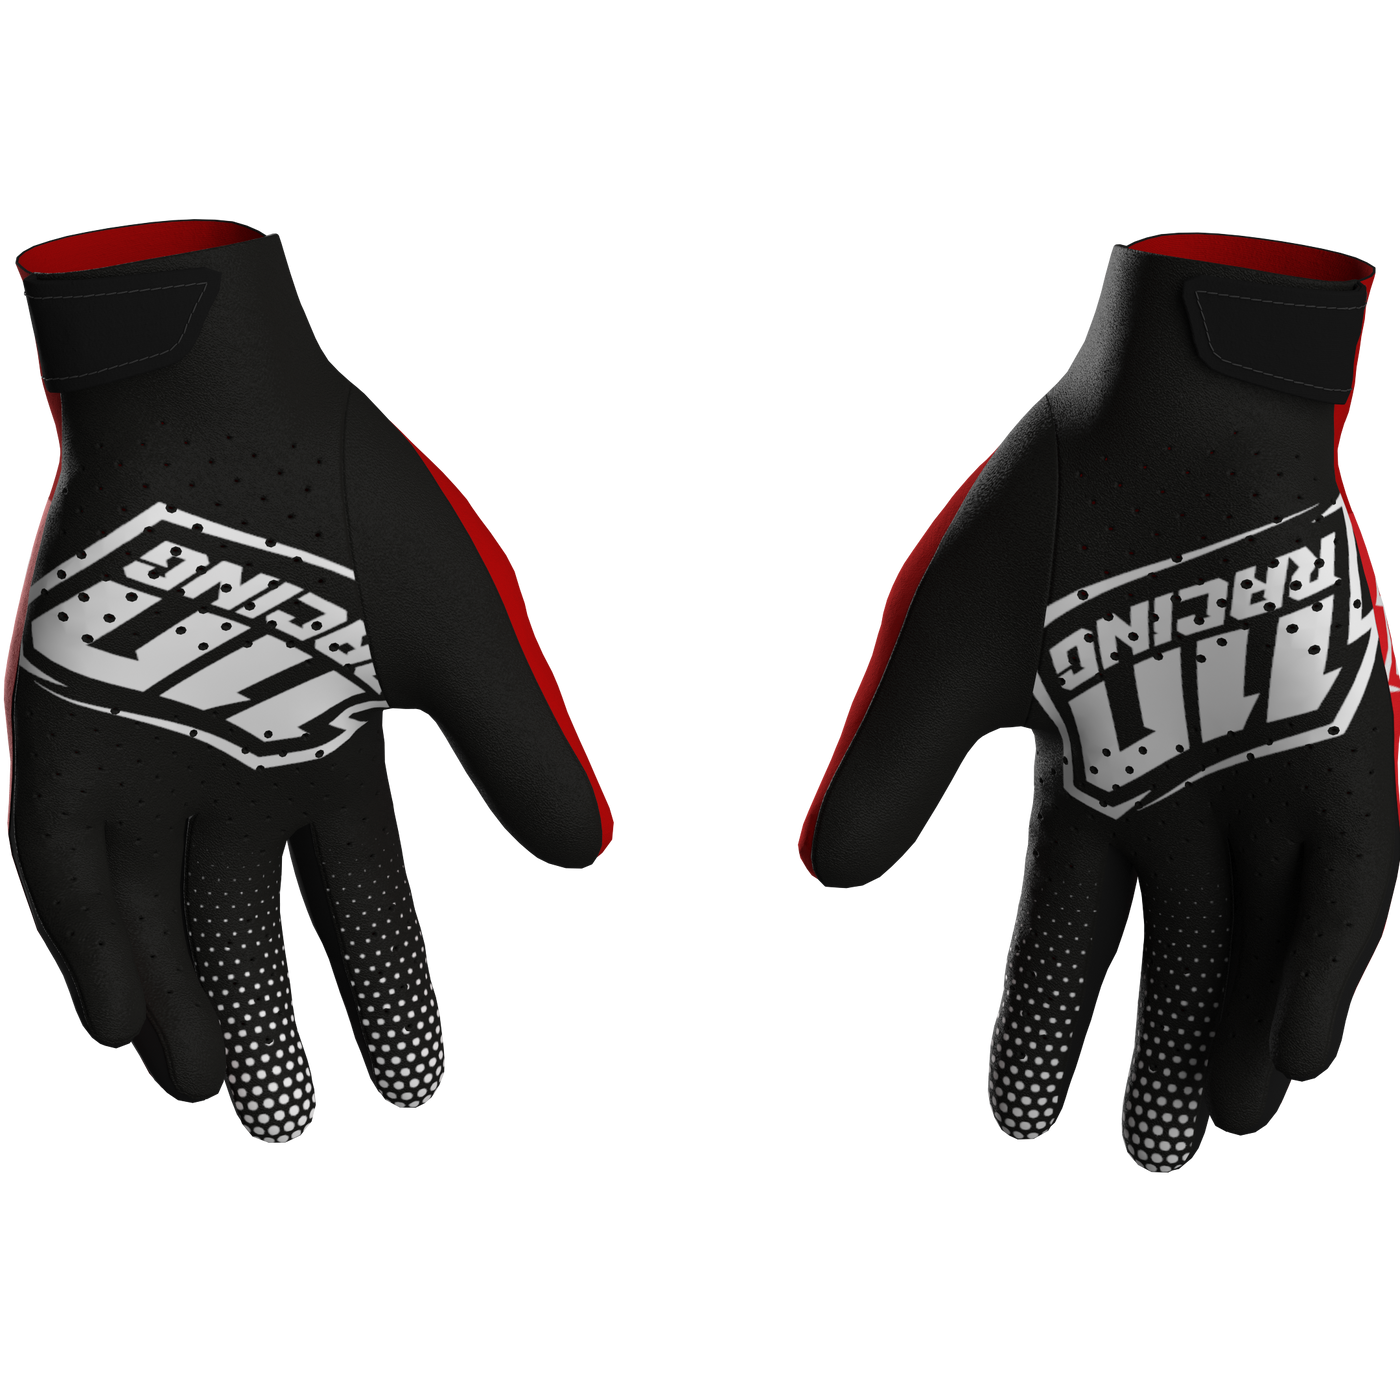 110 RACING // VELOCITY LITE 24' YOUTH GLOVE - RED